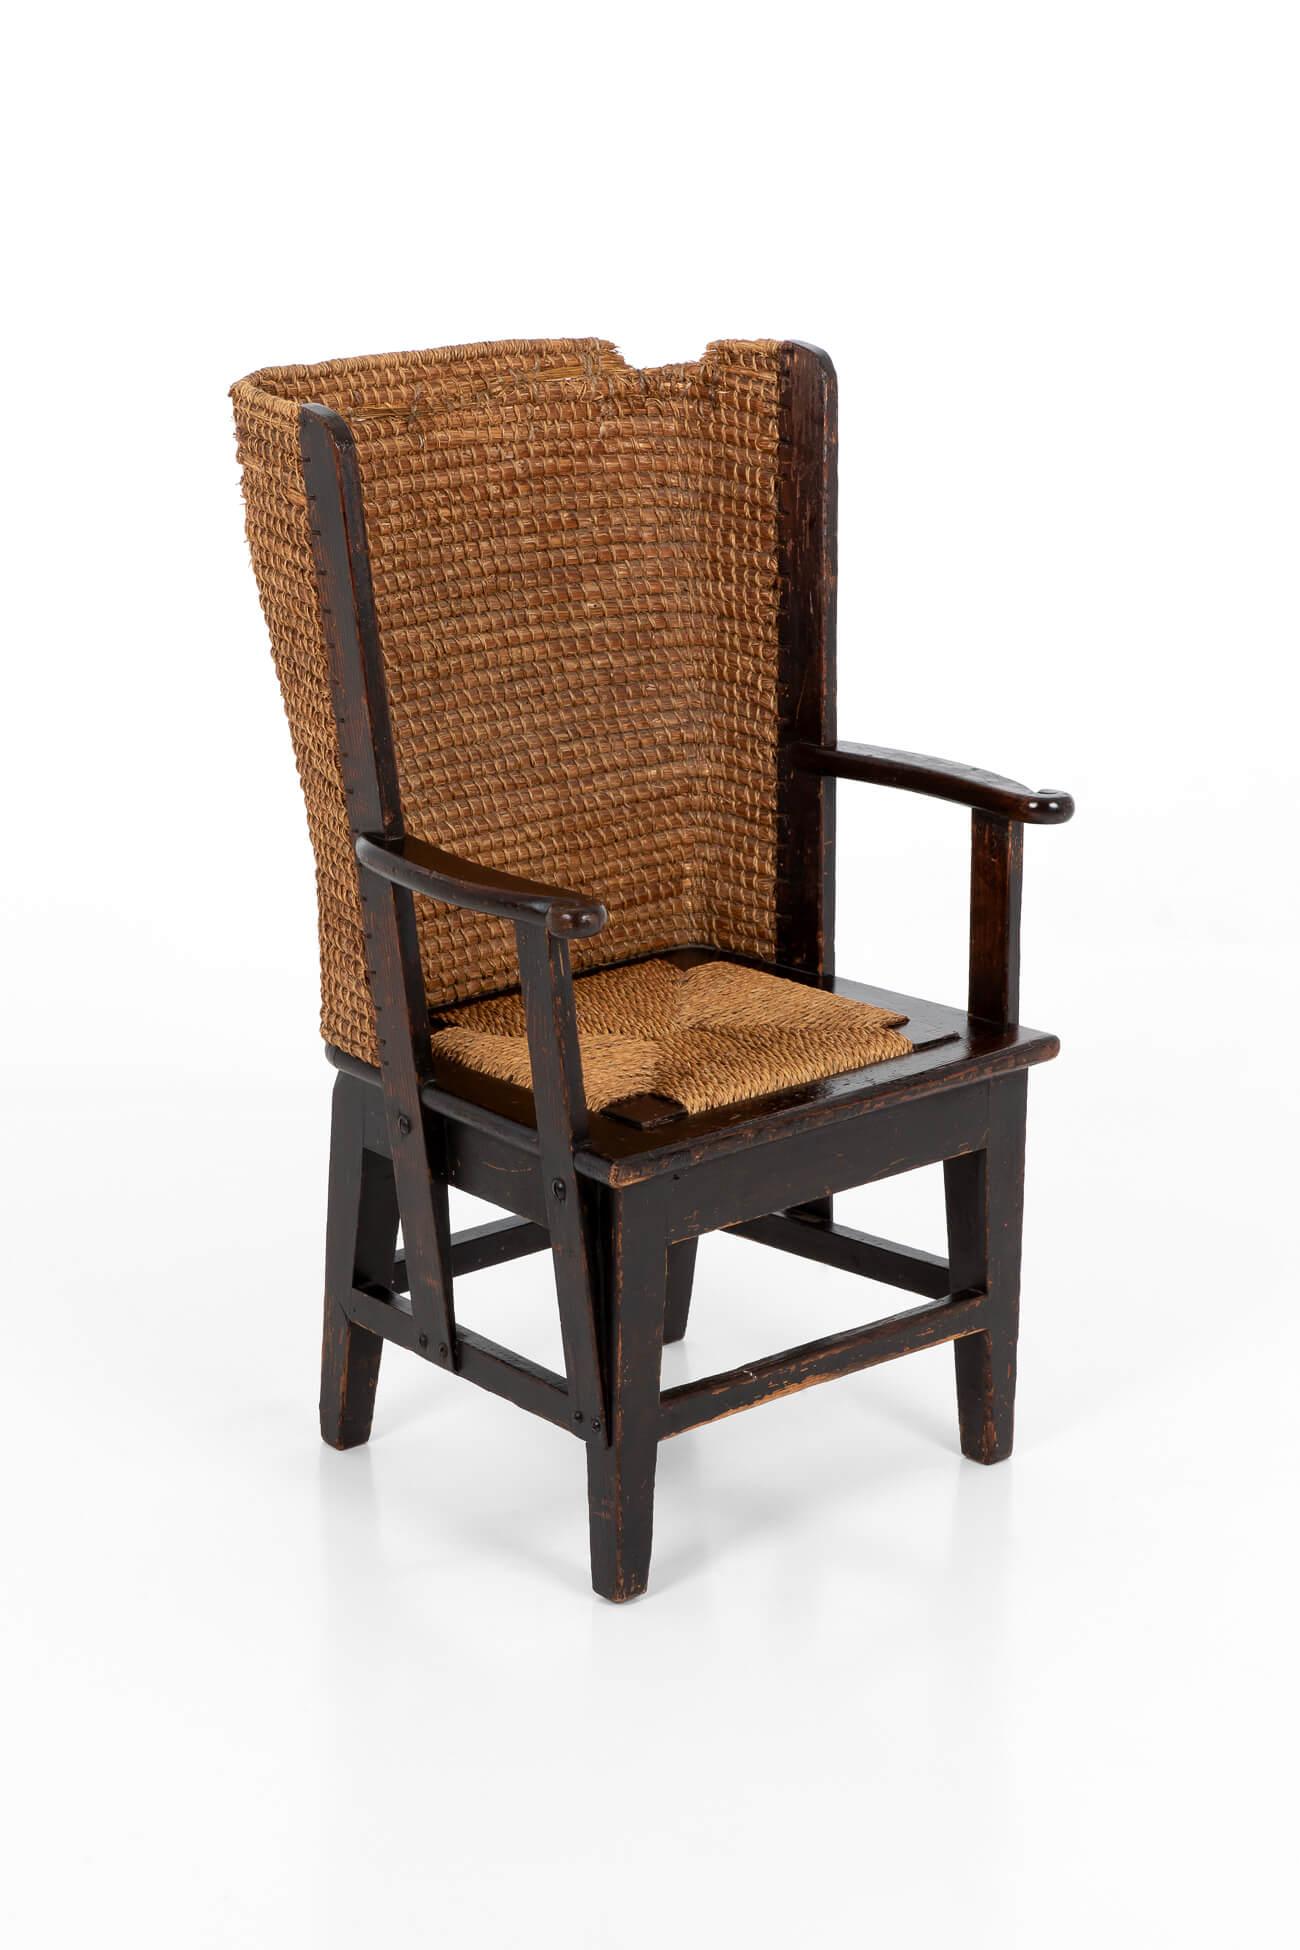 A diminutive Orkney chair in stained Scottish pine. Made with oat straw with a drop-in rush seat on tapering legs. Sympathetic historical restorations only add to the charm of this beautiful chair. 
Scottish, circa 1900.

Additional